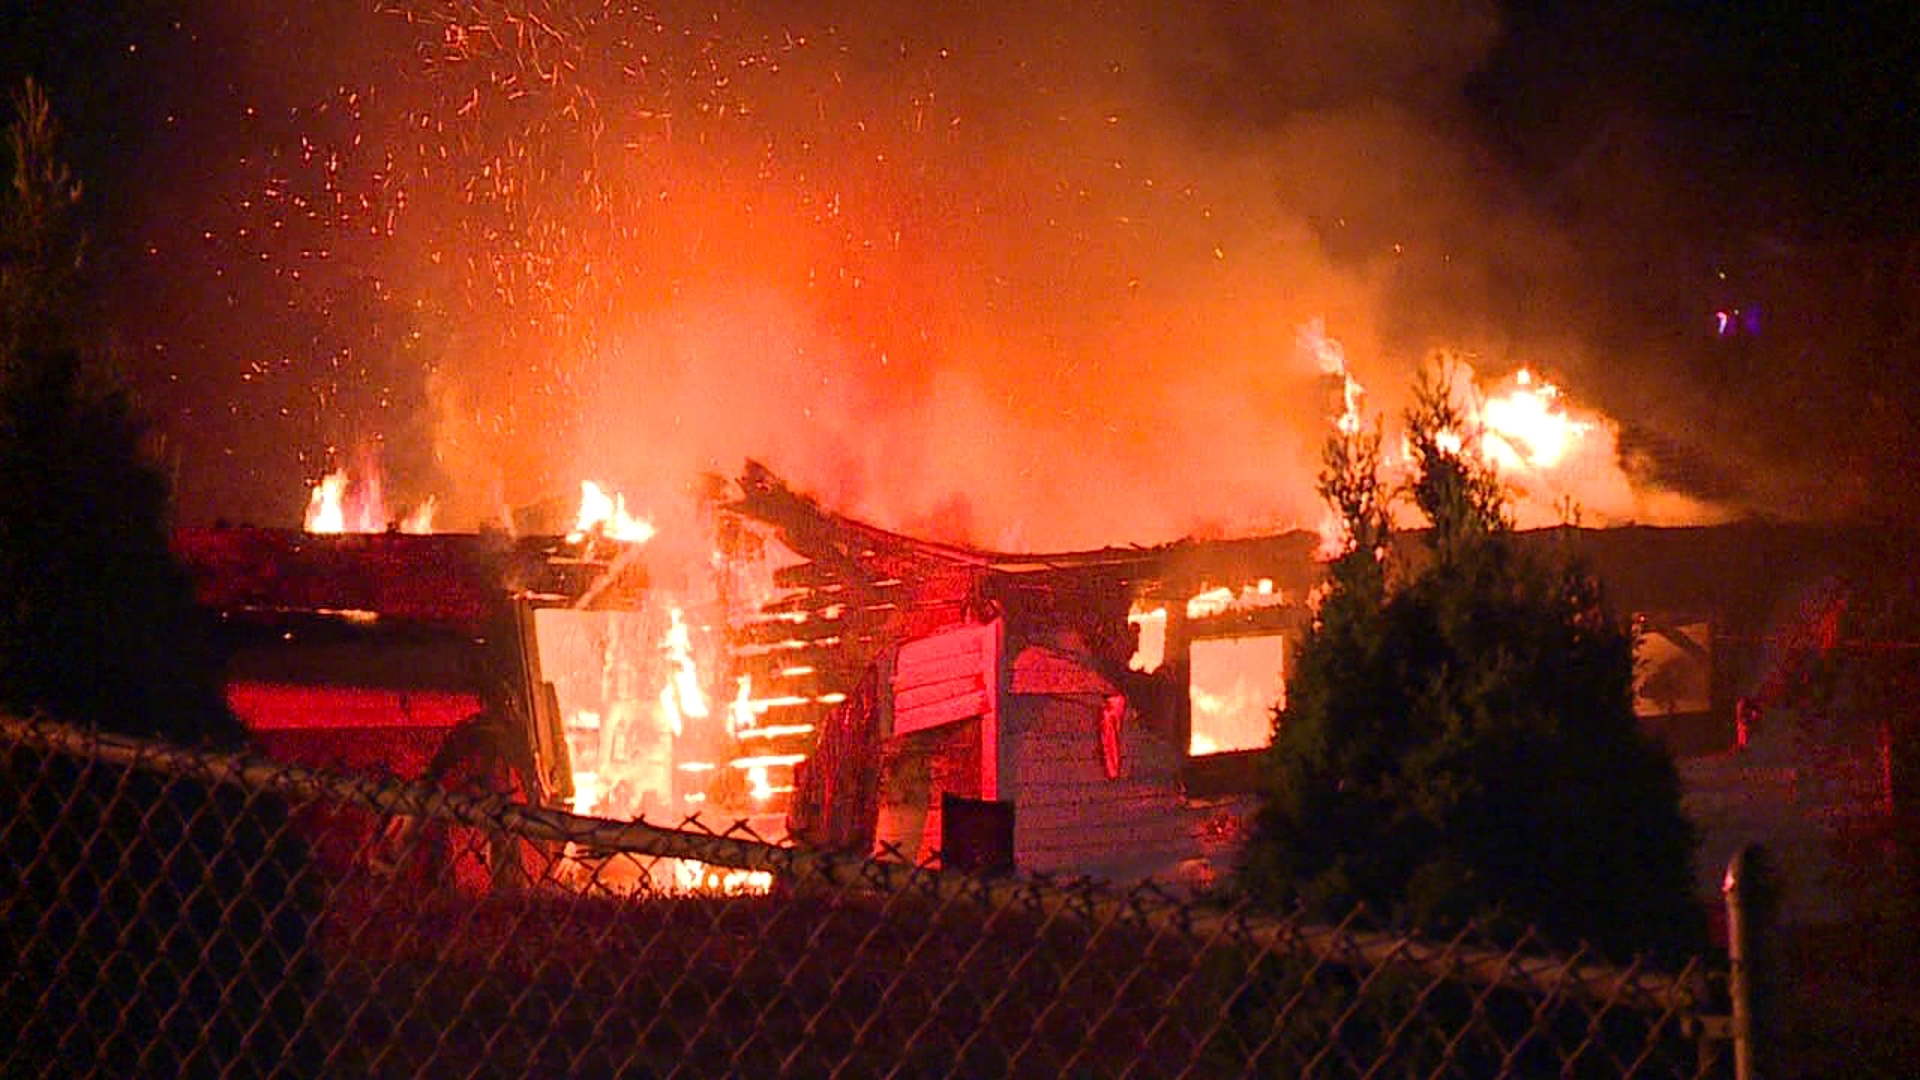 Crews battled flames in Taylor early Friday morning